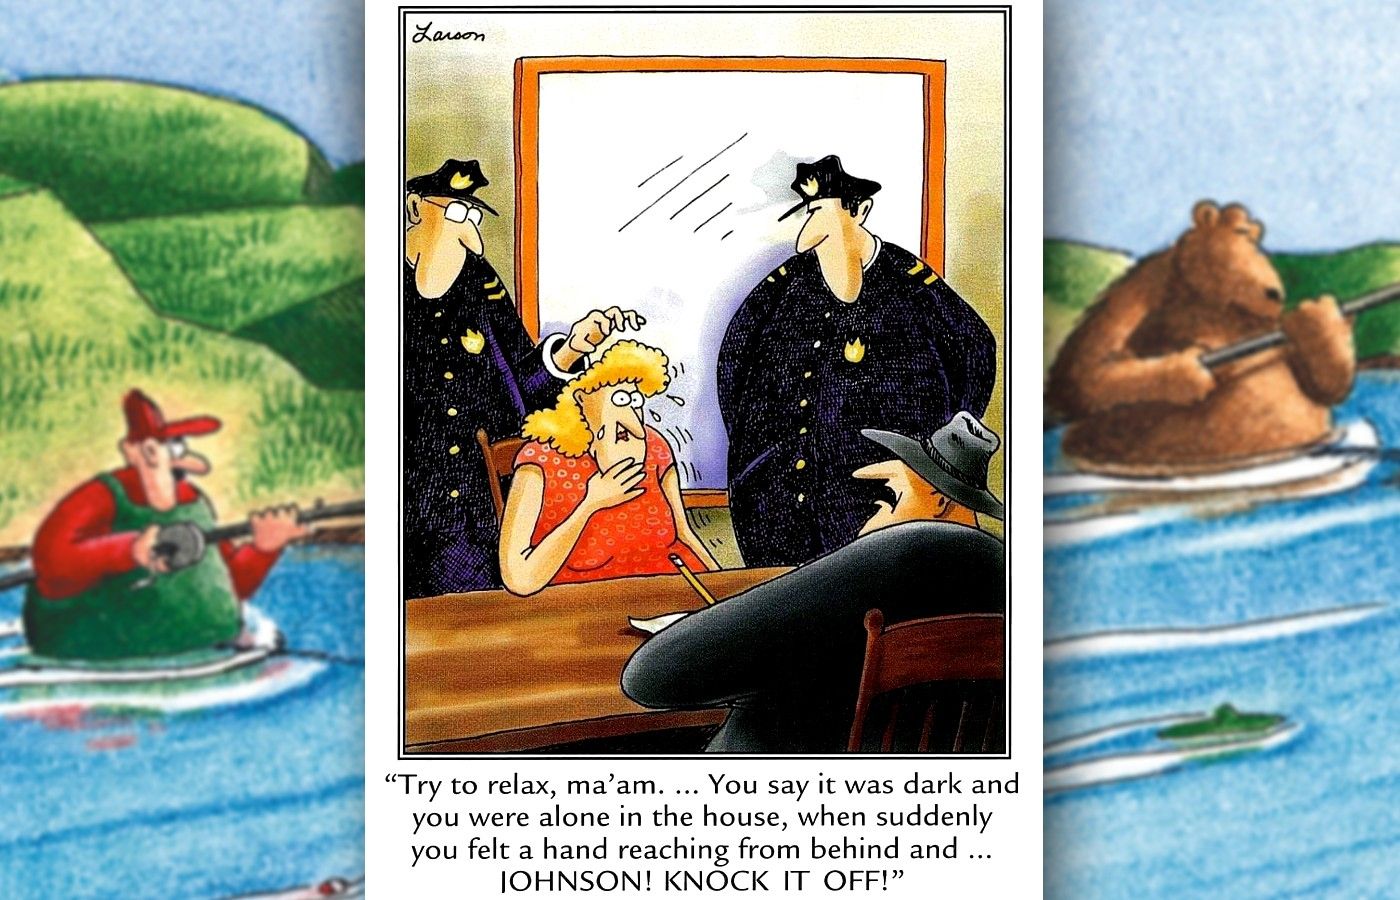 far side comic where a detective tells off a cop who is messing with a witness